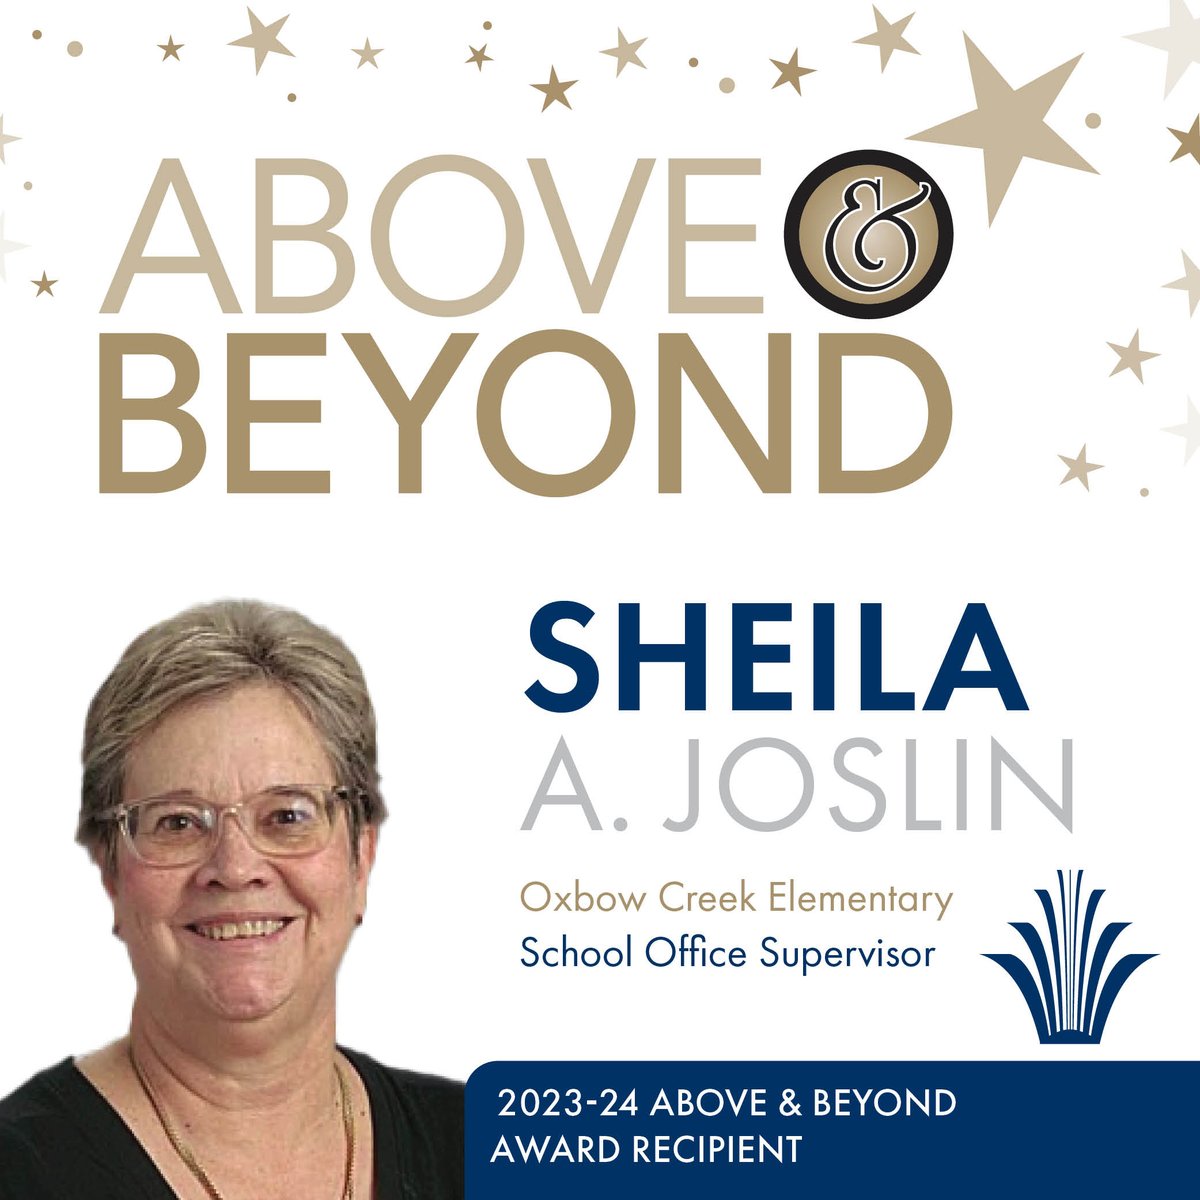 Congratulations to 2023-24 Above & Beyond Awards recipient: Sheila Joslin! Sheila is often the first point of contact for new families enrolling at Oxbow Creek, or a friendly face for families and students with questions or concerns. Read more: bit.ly/442PzkJ